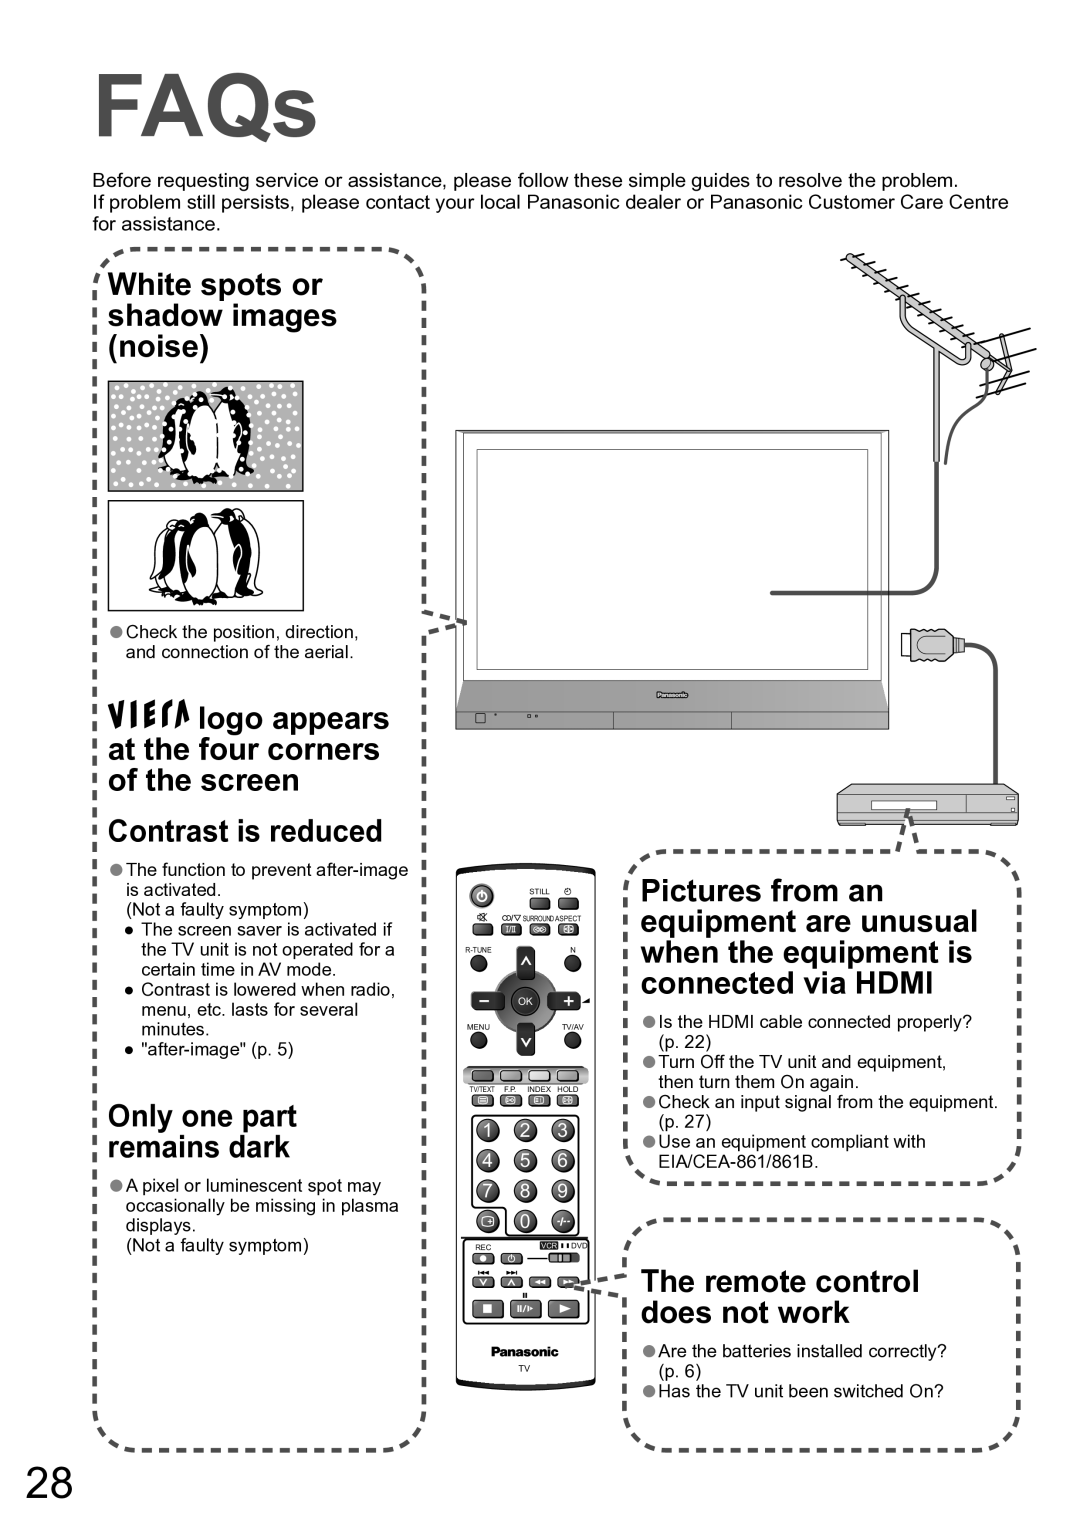 Panasonic TH-42PV60A manual FAQs, Check the position, direction, and connection of the aerial 